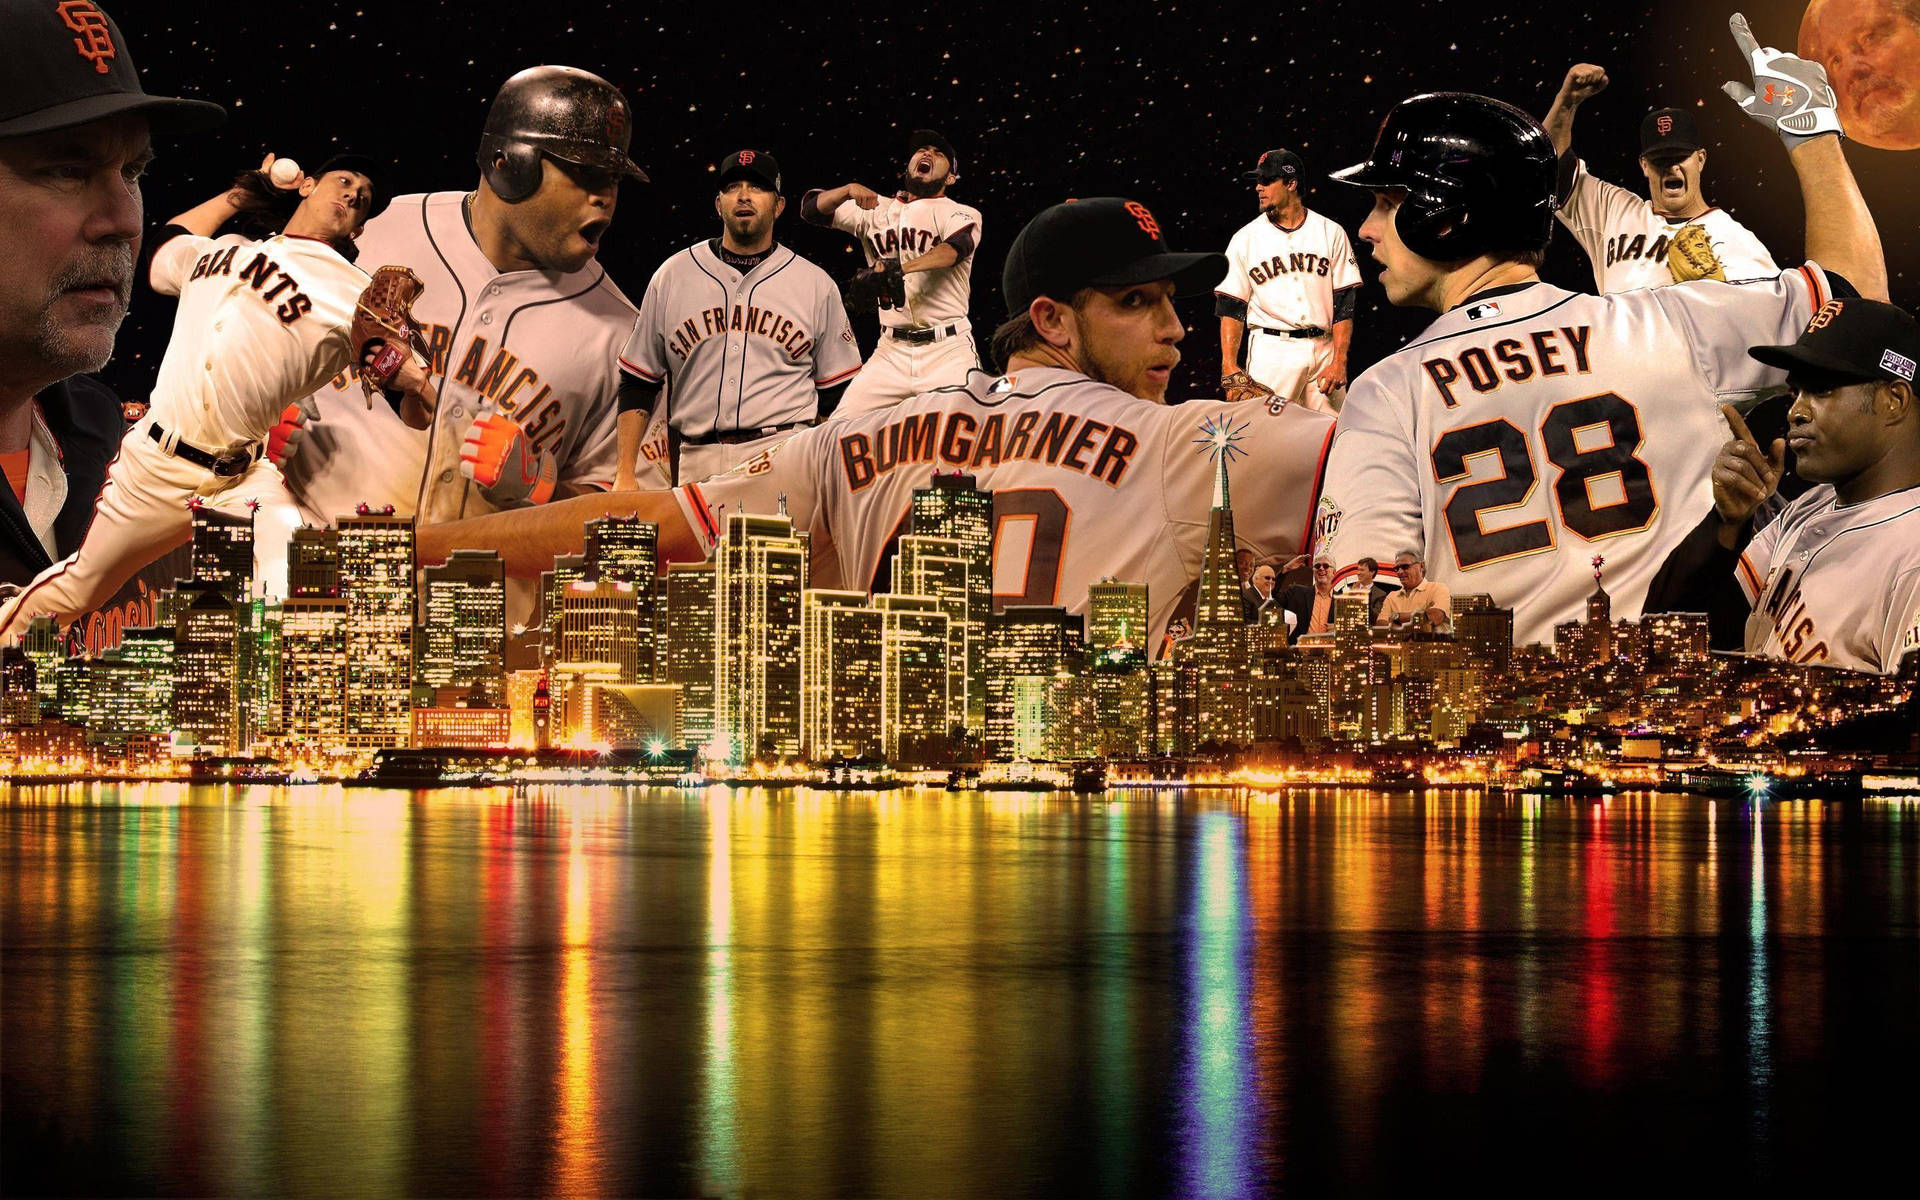 Busterposey Fotocollage Wallpaper